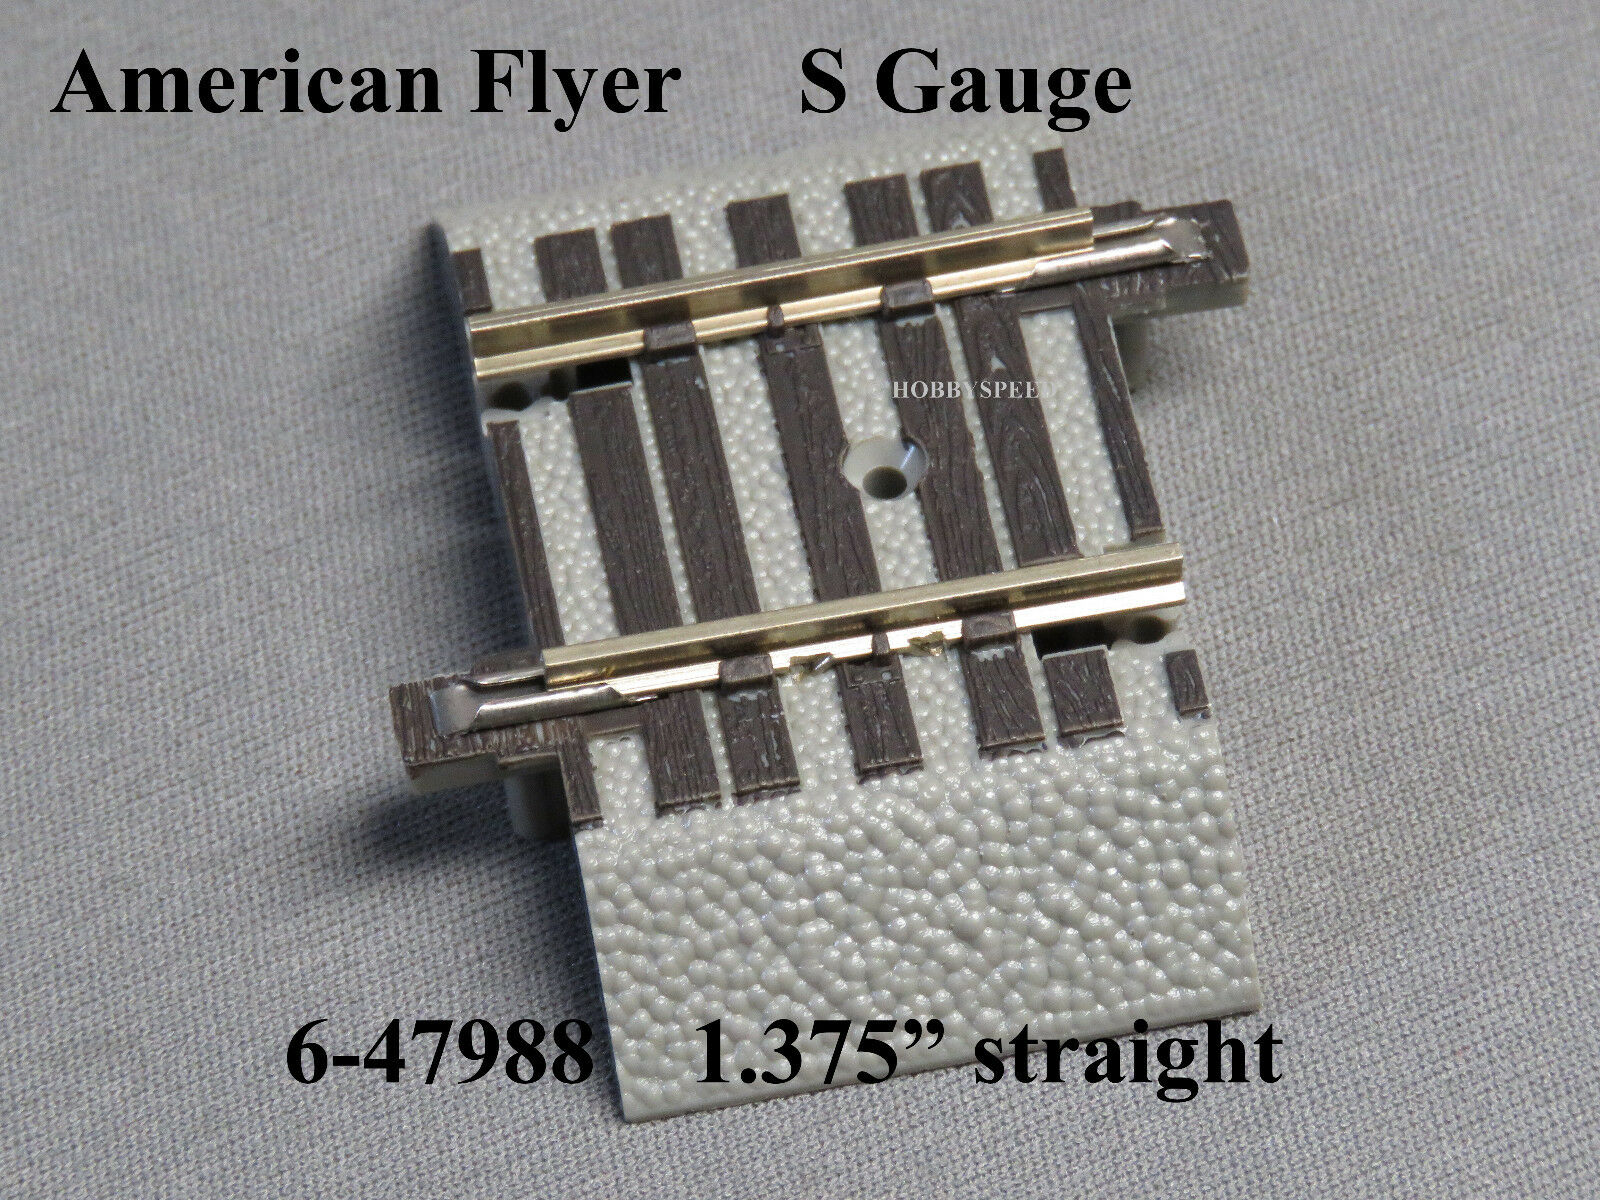 Lionel American Flyer Fastrack 1 3/8" Straight S Gauge 2 Rail Track 6-47988 New